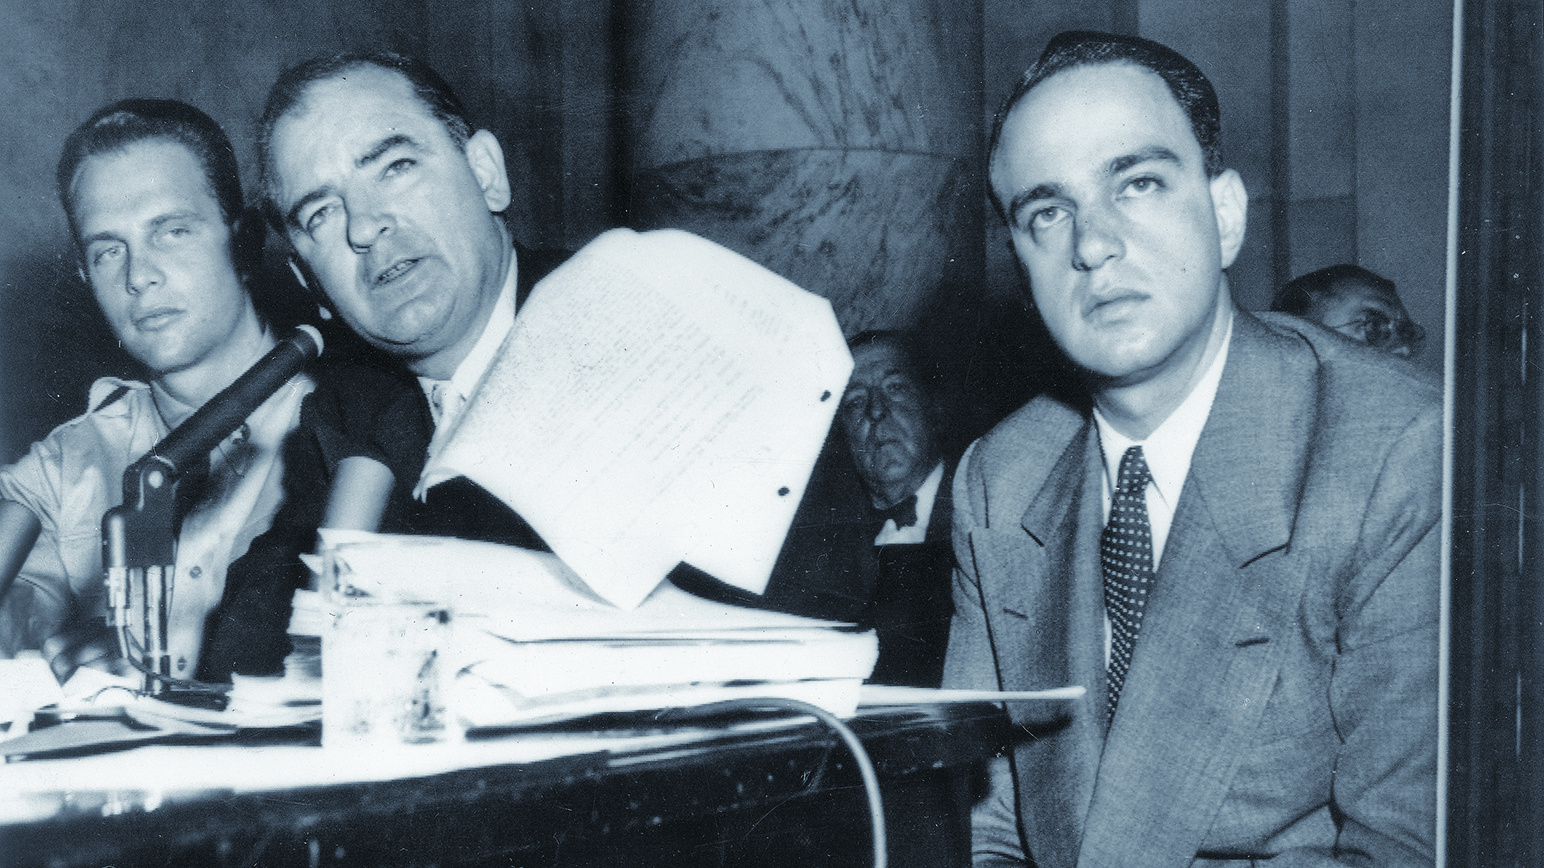 McCarthy during the 1954 Army hearings with aides David G. Schine, left, and Roy Cohn. (Wisconsin Historical Society Image No. 3614)